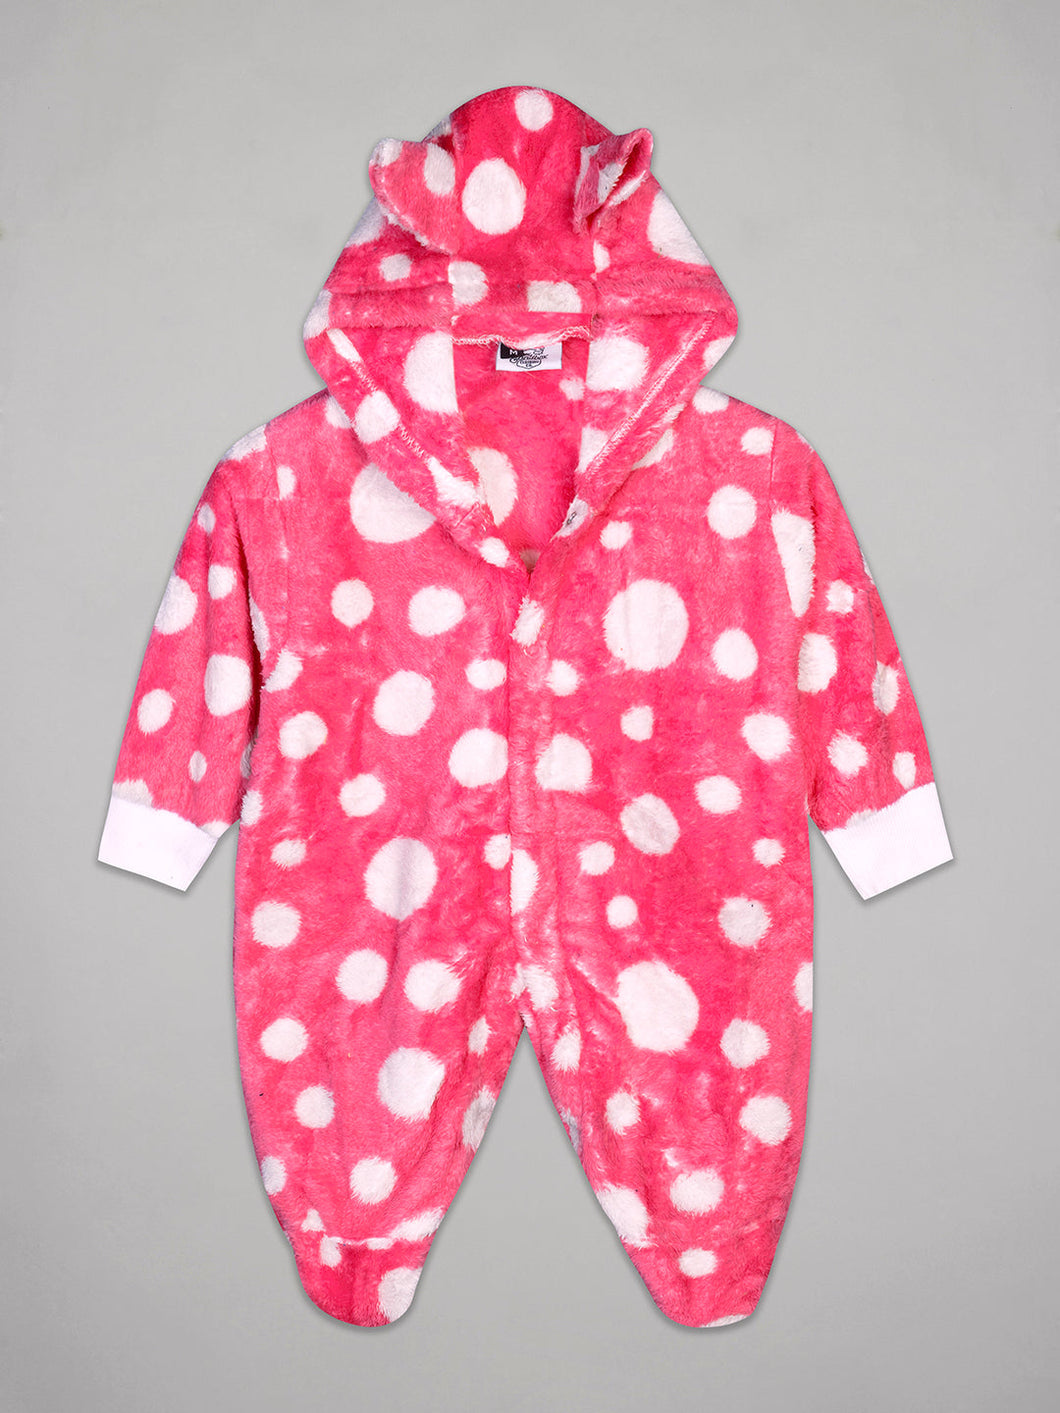 The Sandbox Clothing Co. Winter Rompers RM293